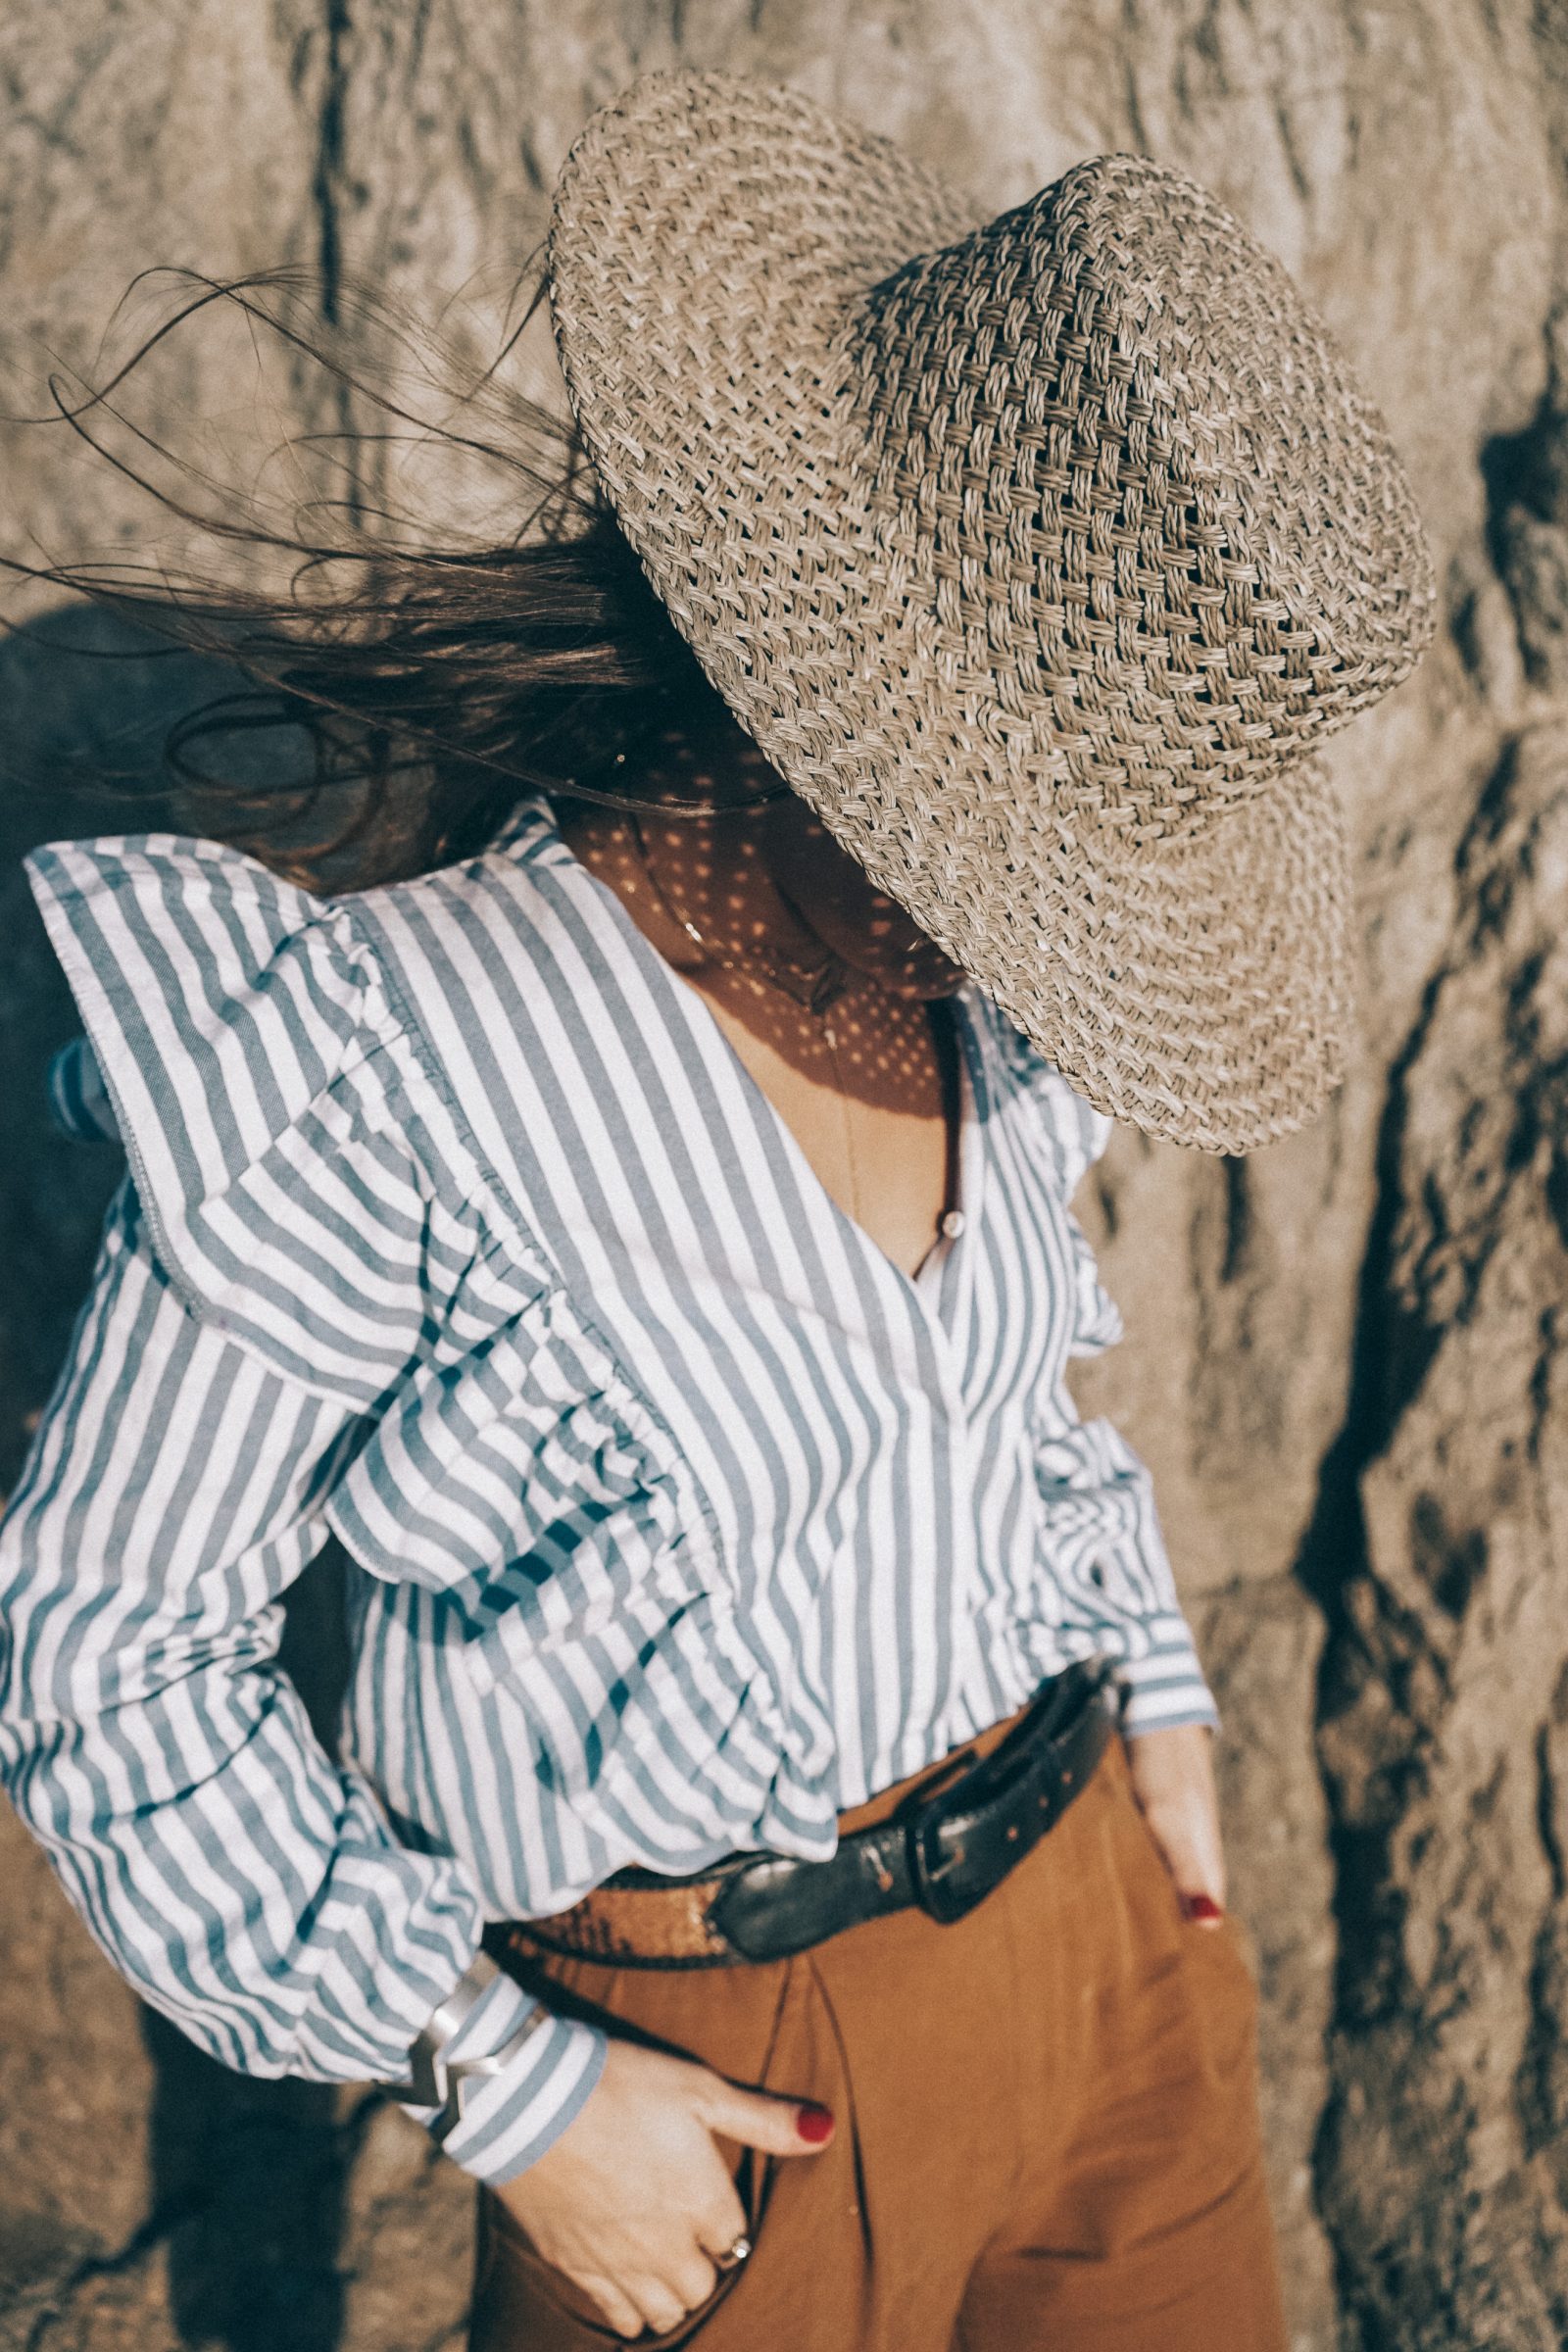 stripped_blouse-camel_trousers-lack_of_color_hat-wanderlust_jewels-matador_beach-malibu-golden_goose_sneakers-street_style-collage_vintage-156